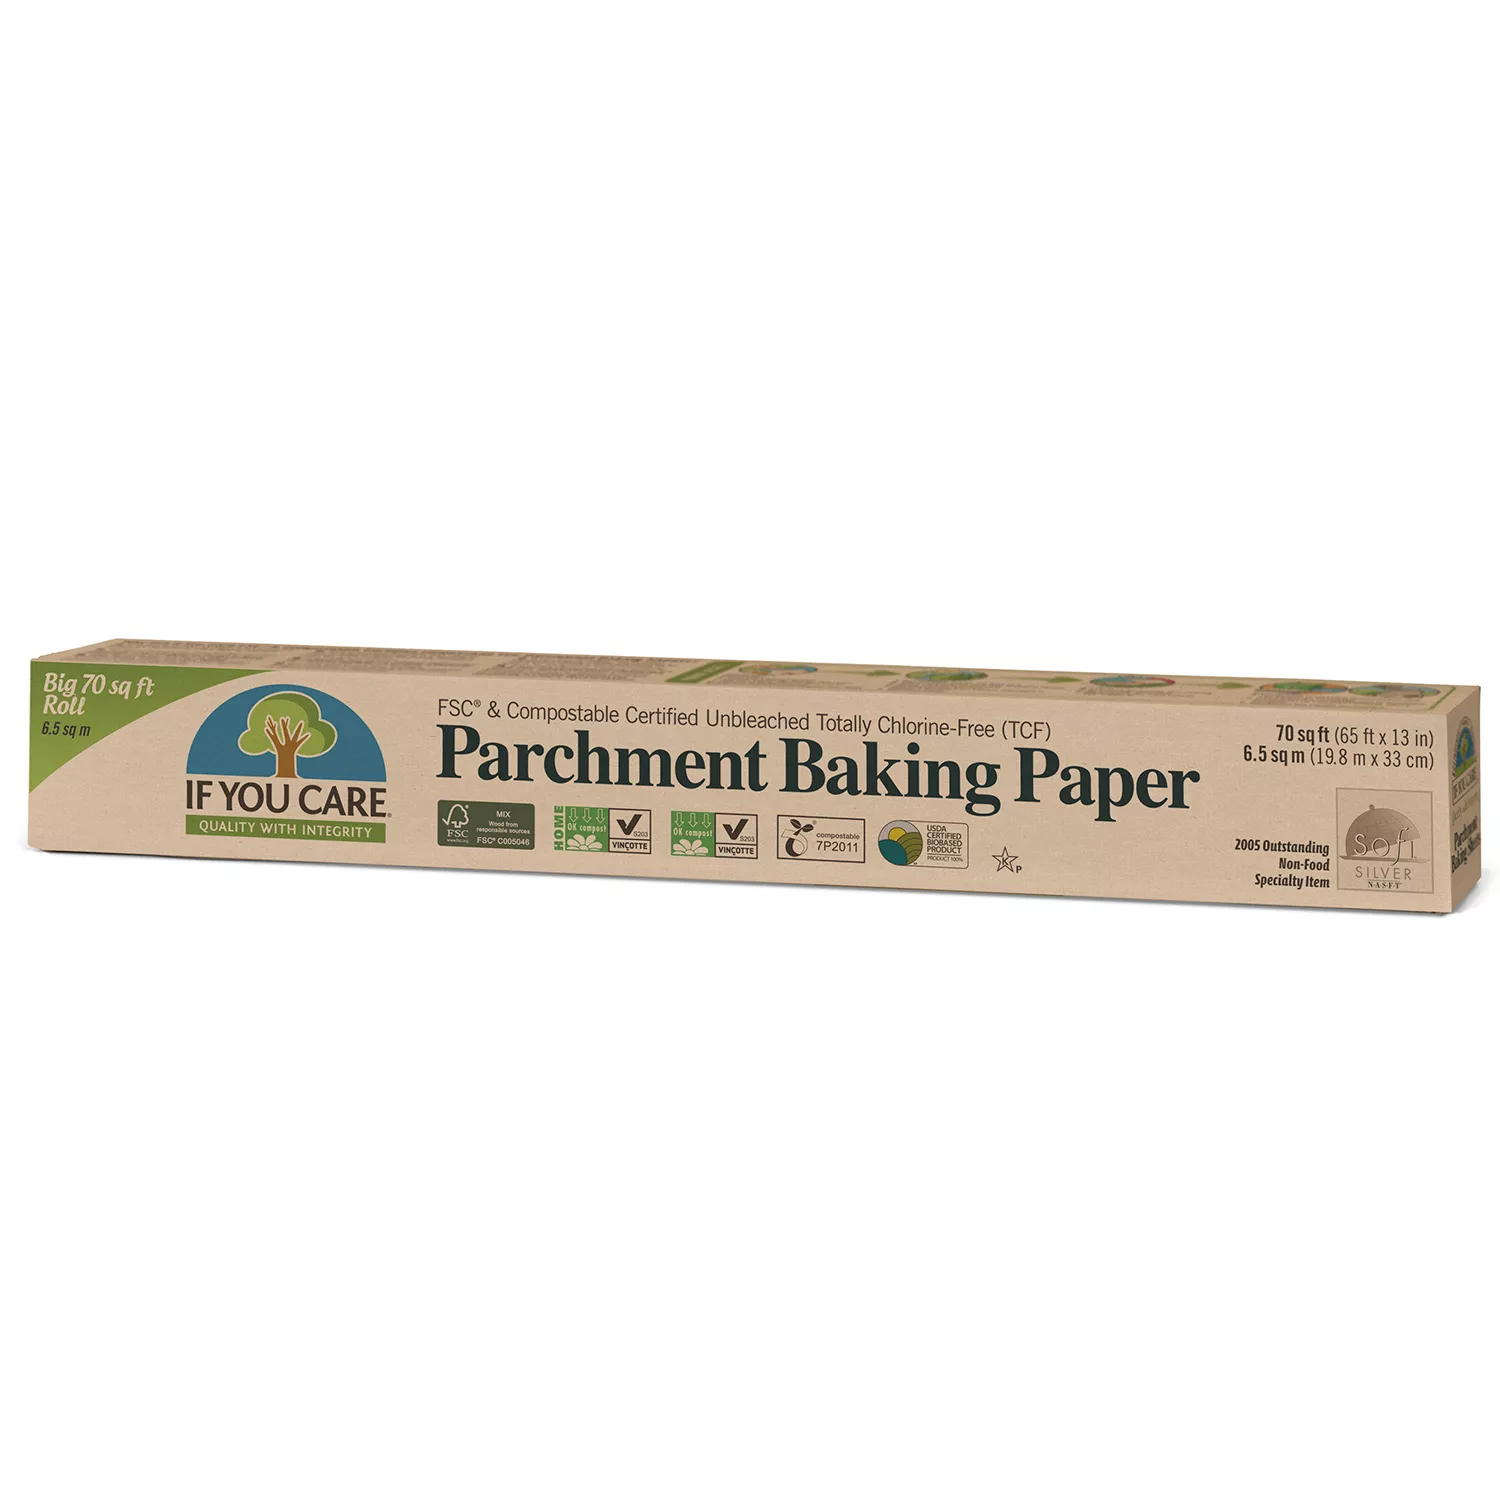 If You Care FSC-Certified Parchment Baking Paper, 70 sq. ft.